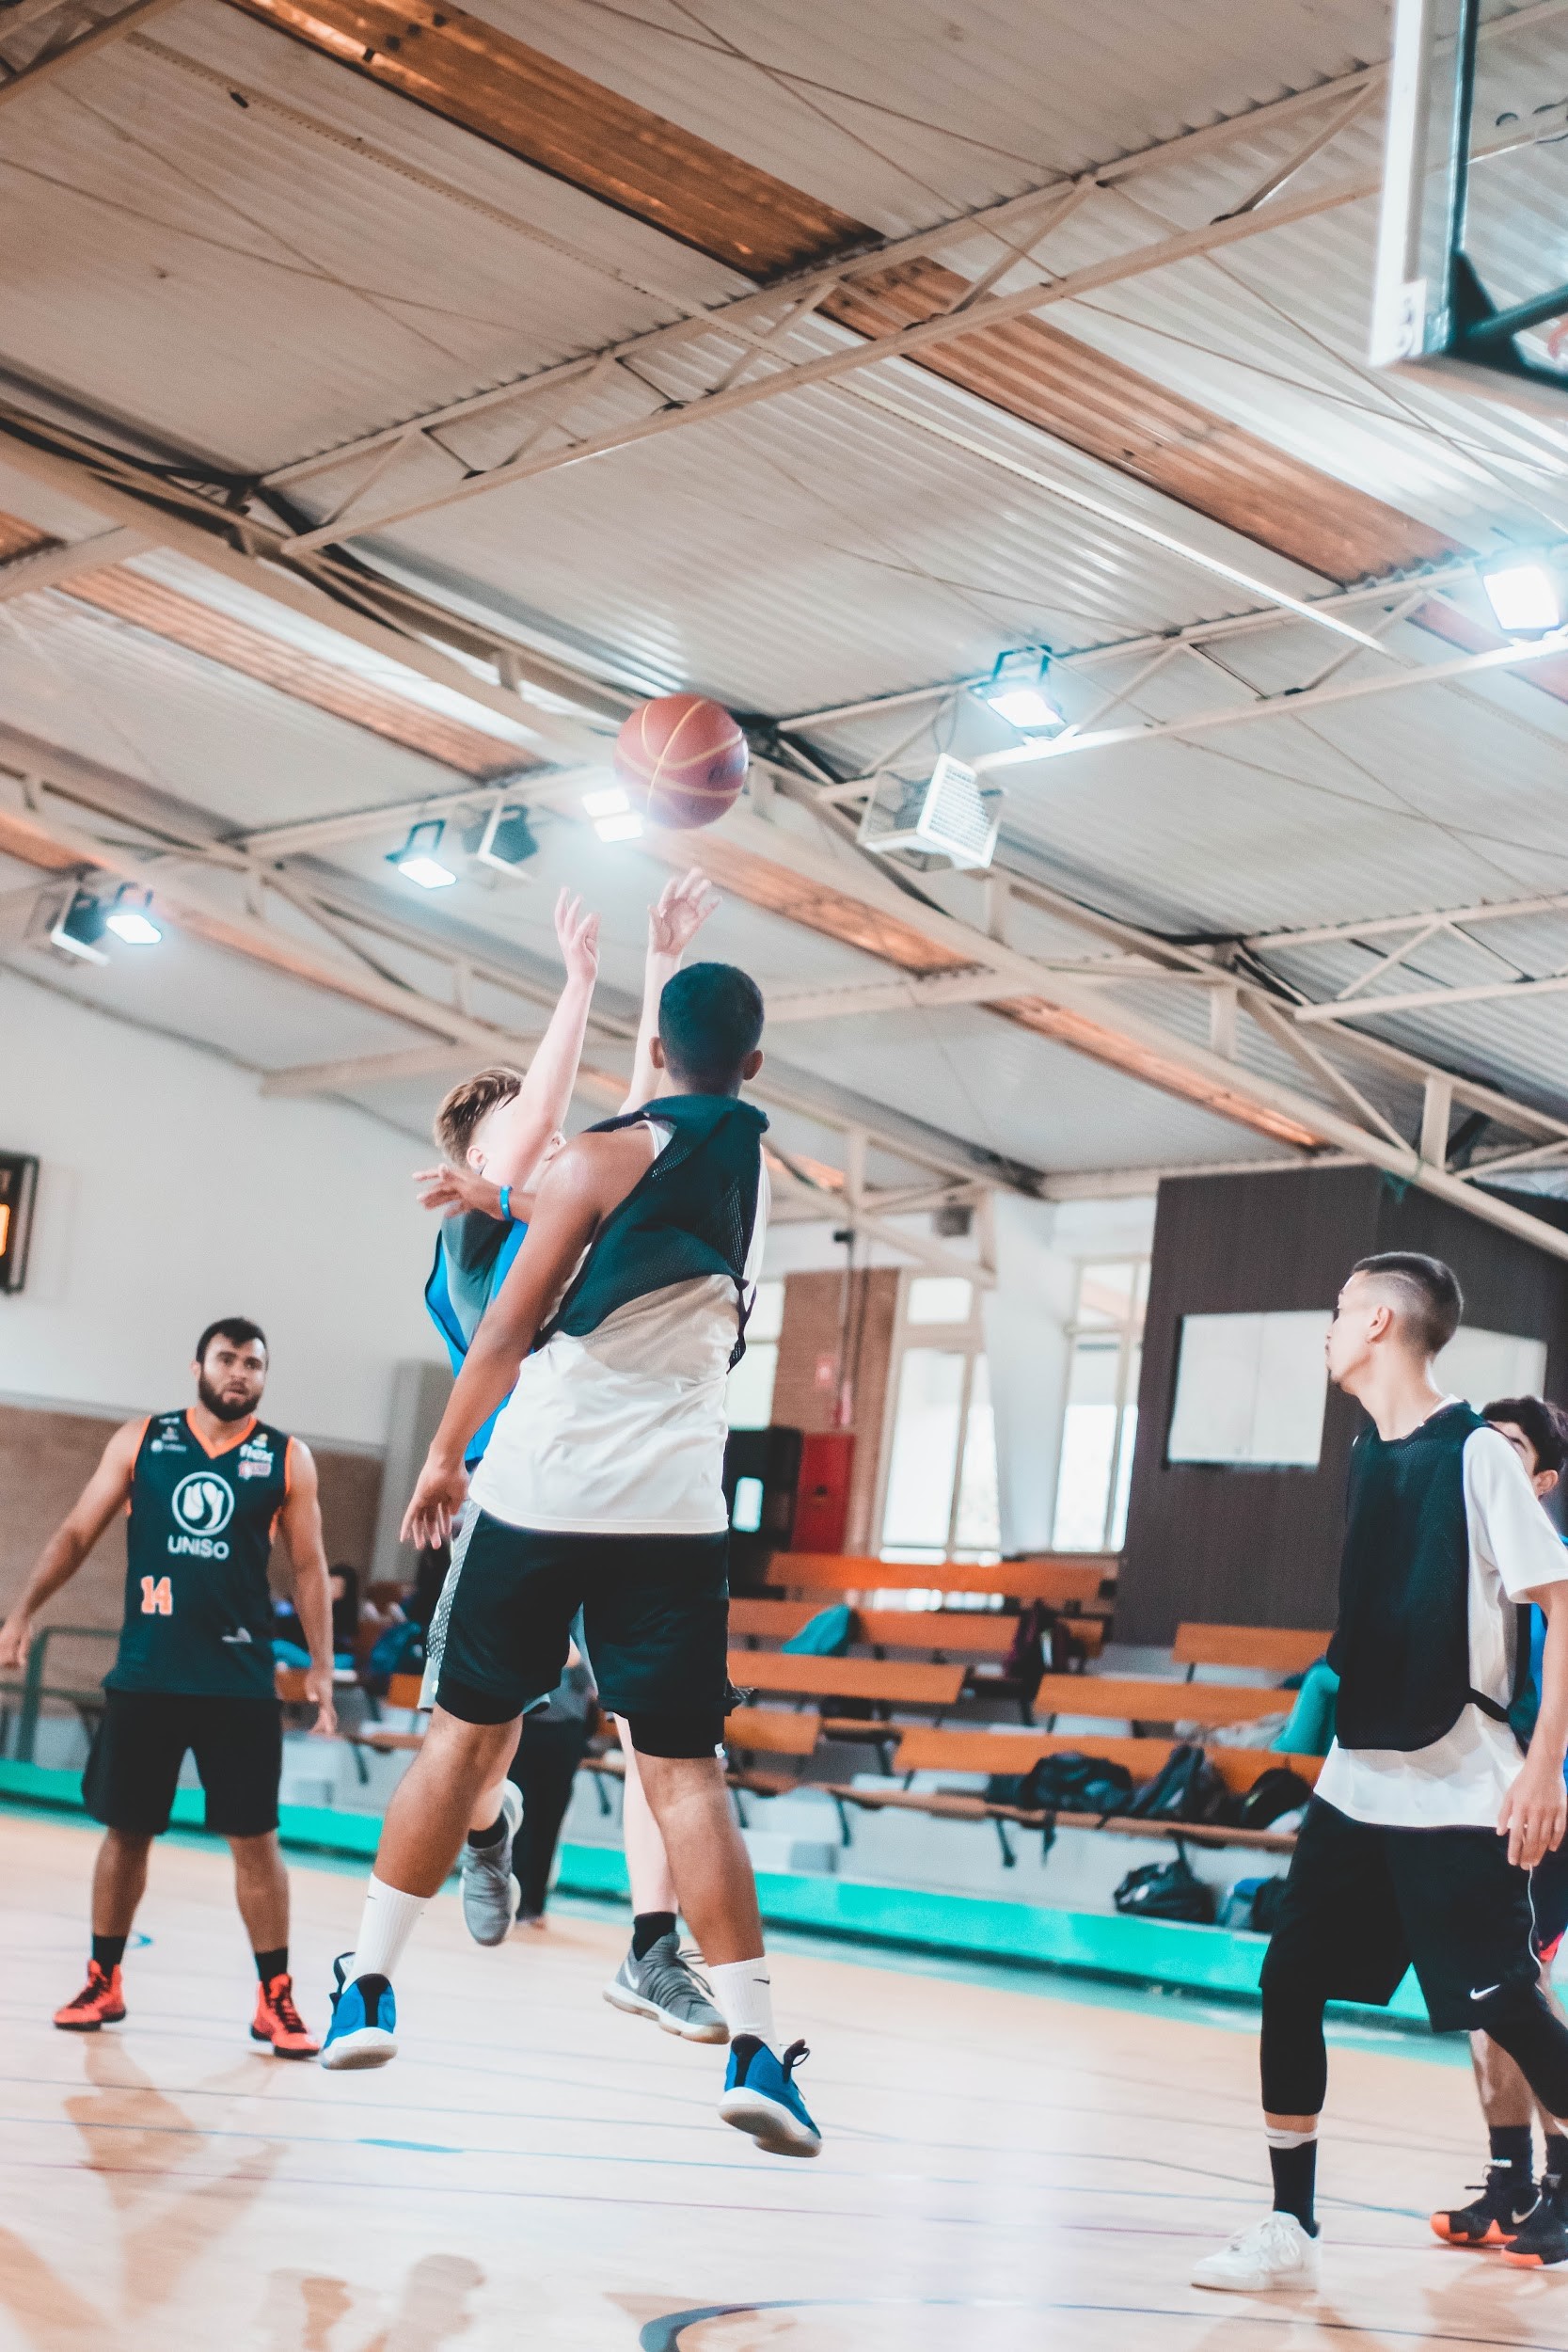 Maintaining an Indoor Basketball Court Home Court Advantage